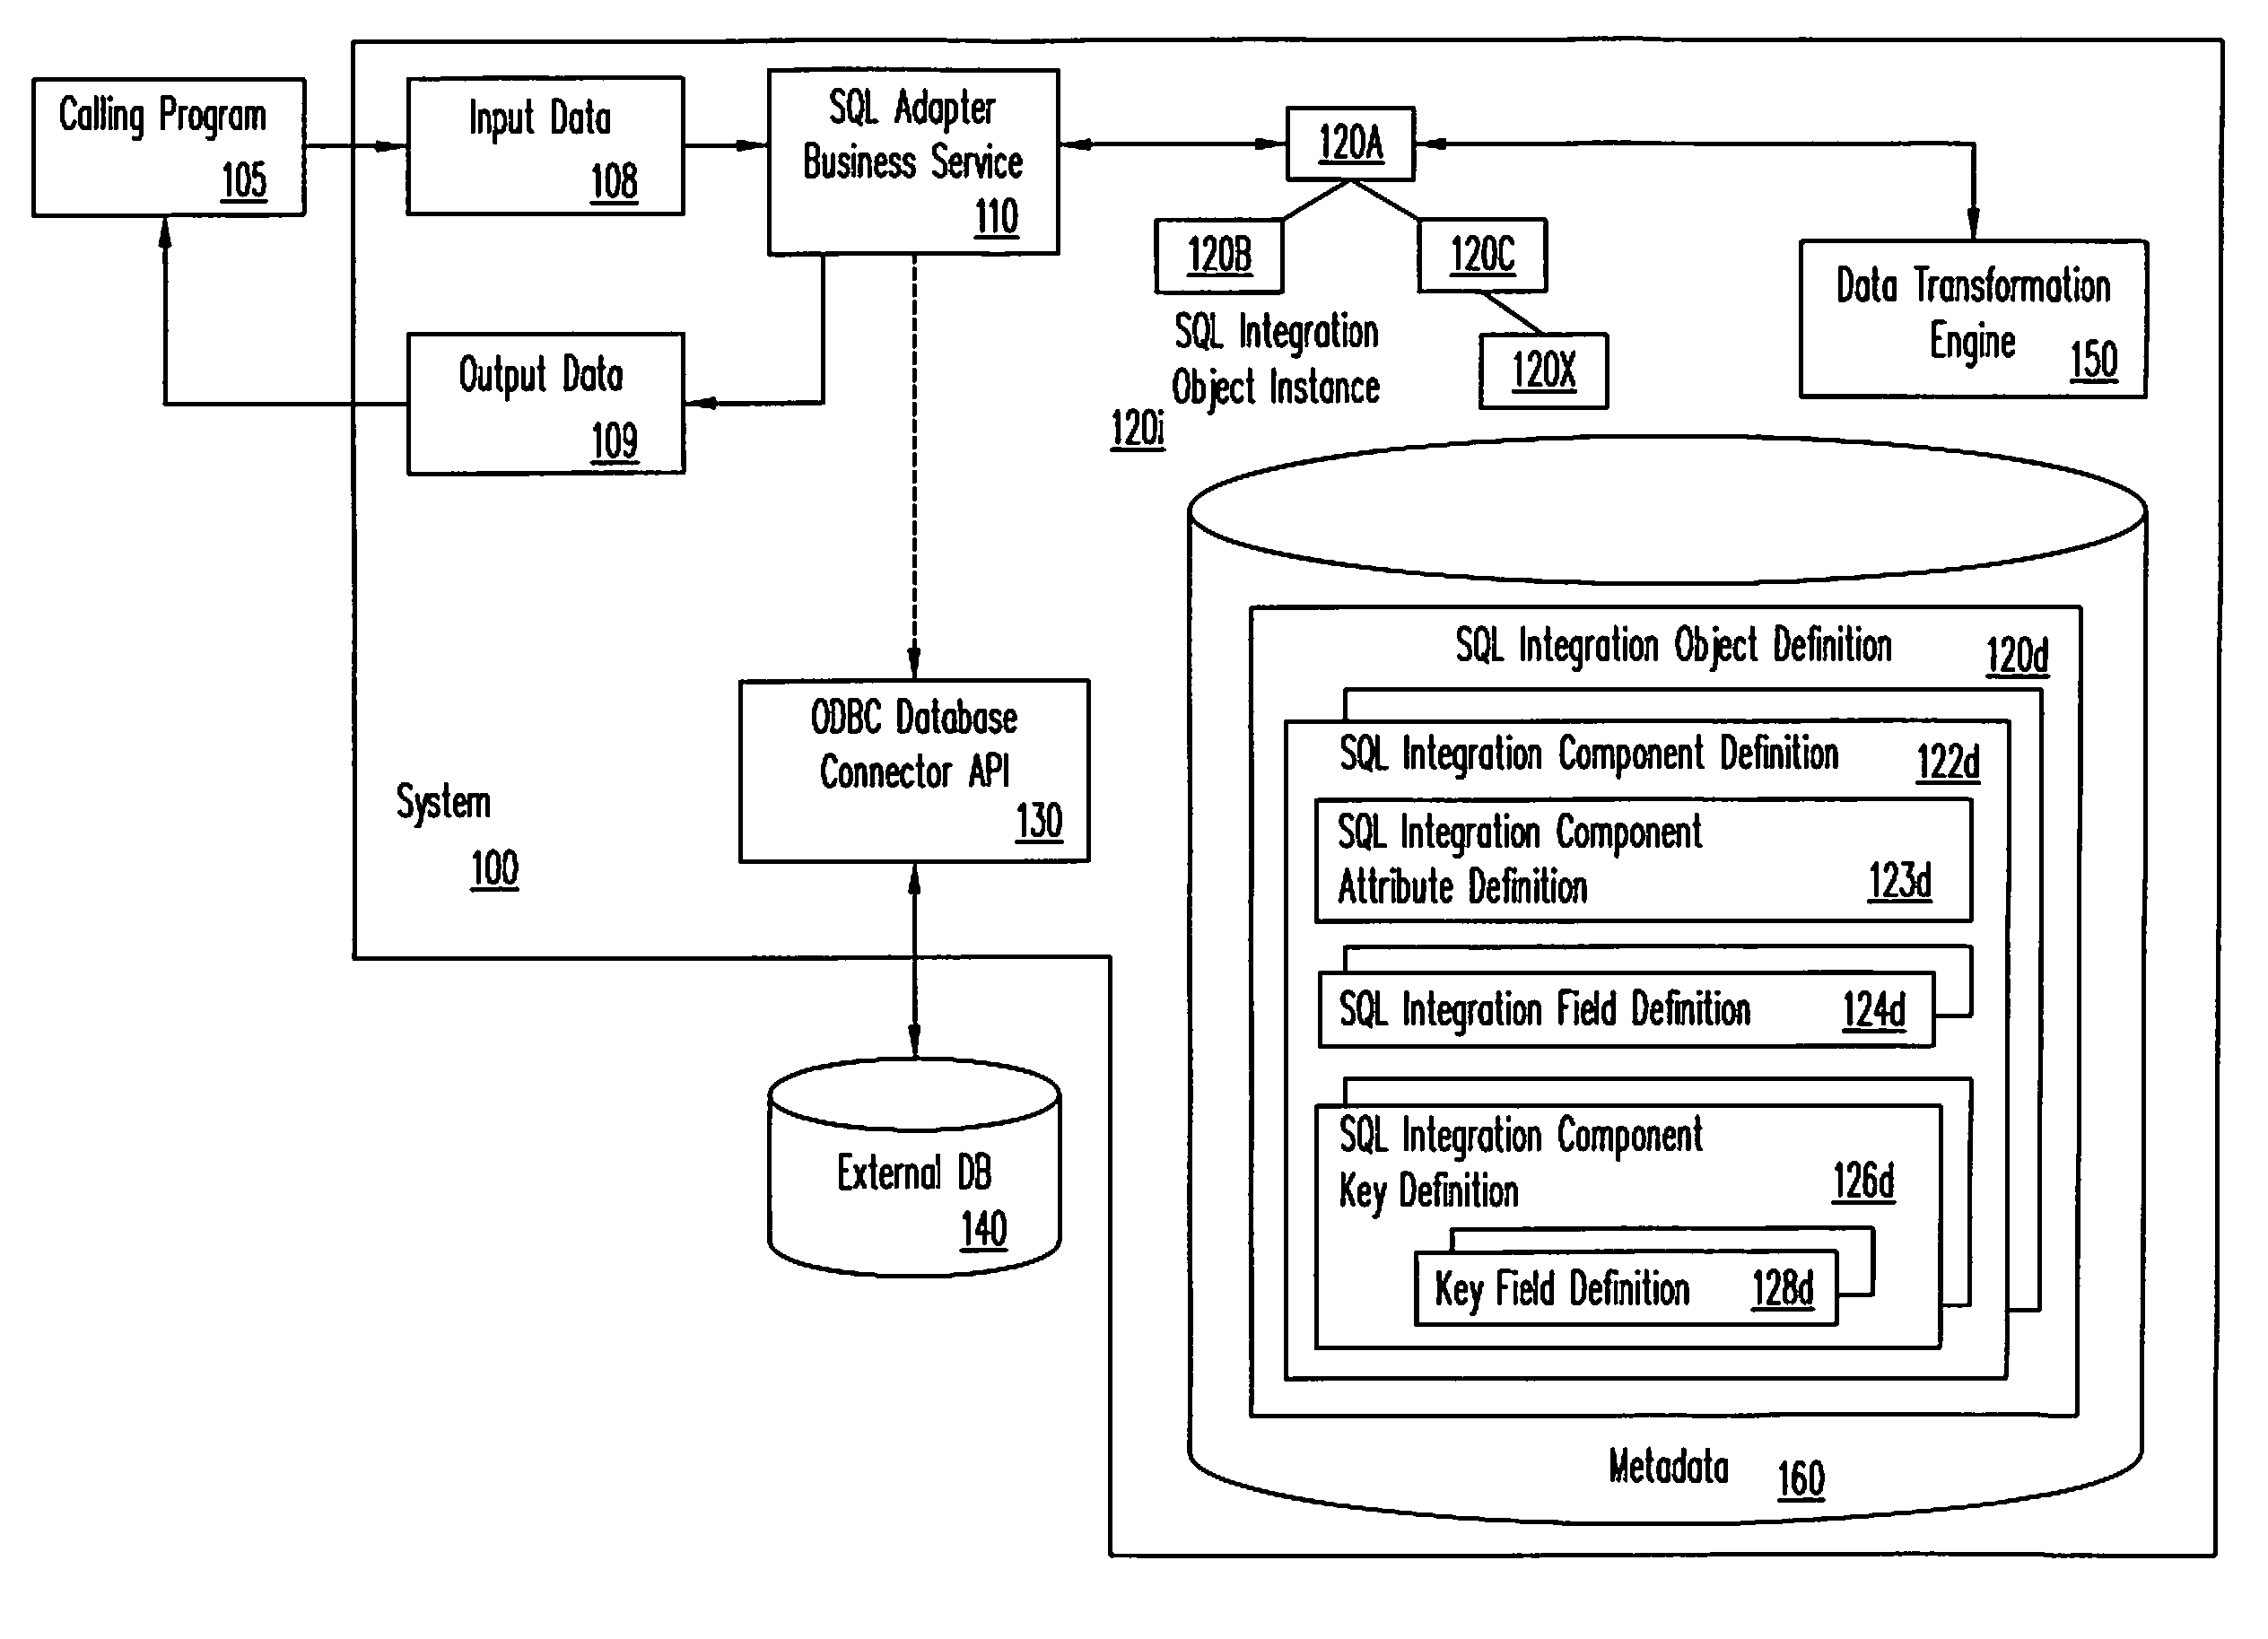 Method and system for an operation capable of updating and inserting information in a database